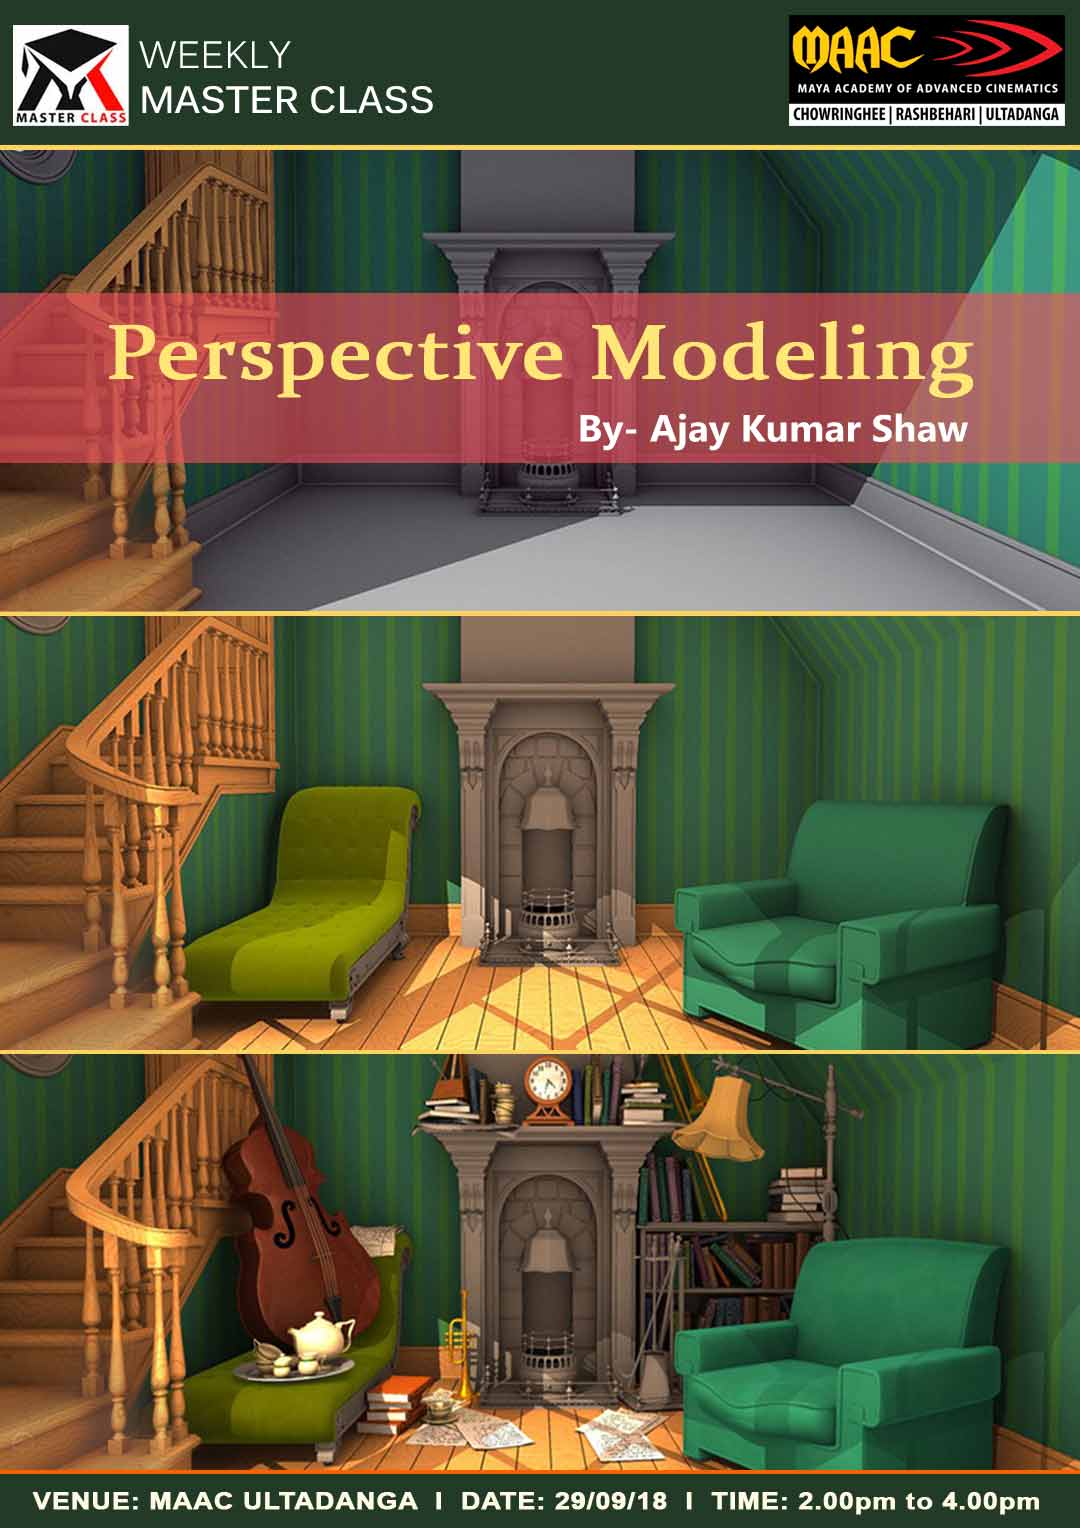 Weekly Master Class on Perspective Modeling